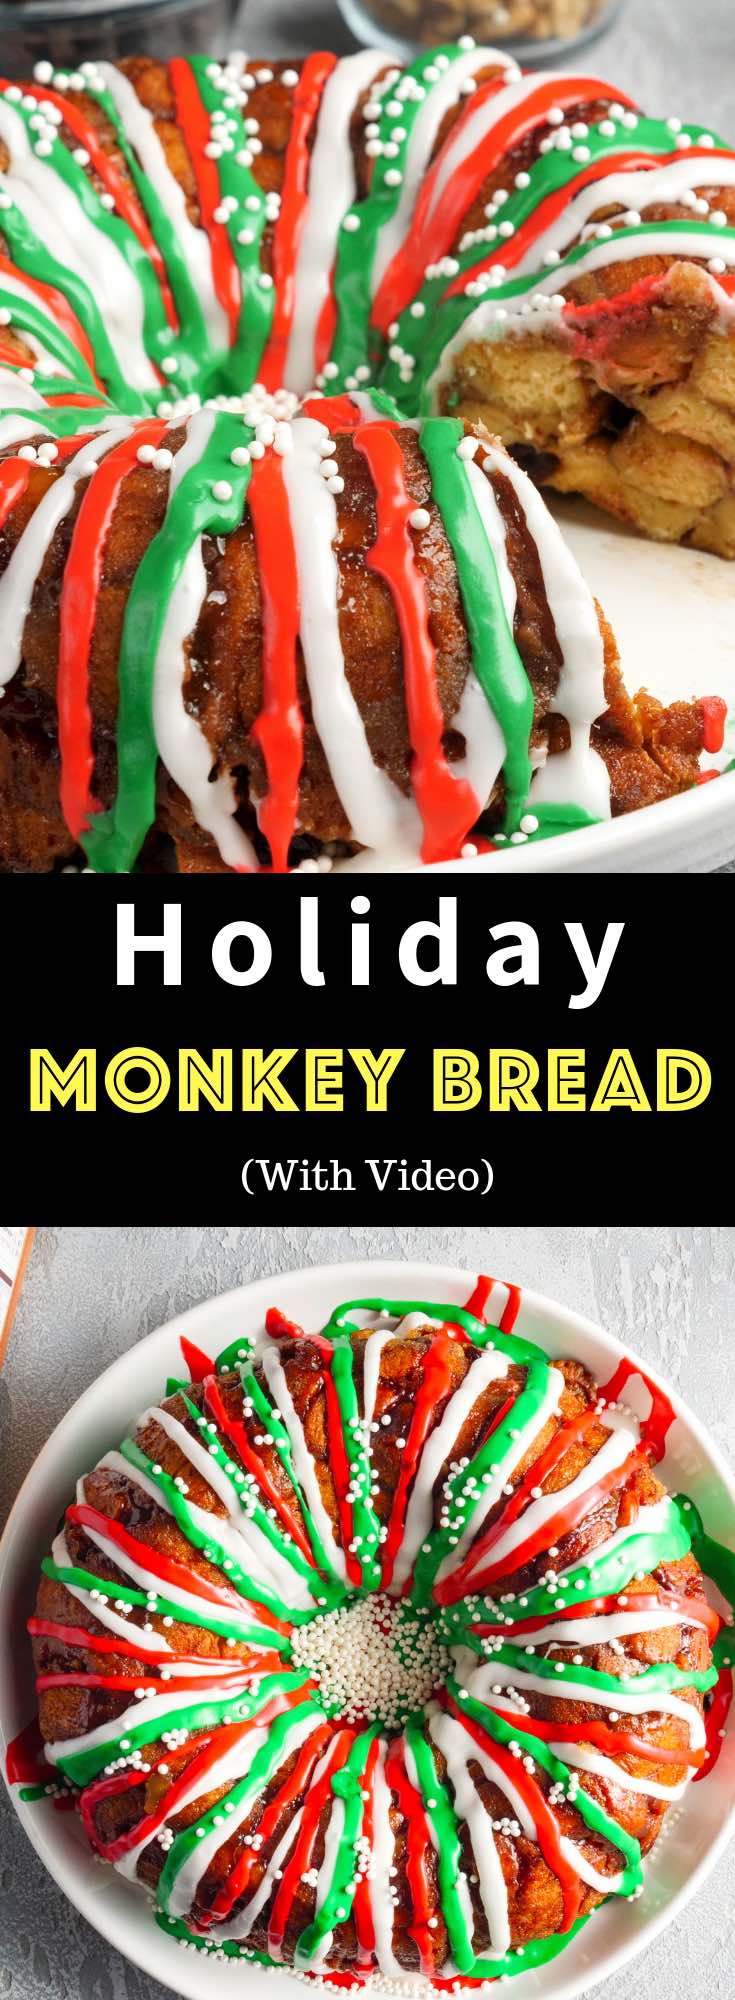 This Holiday Monkey Bread is perfectly festive with a colorful wreath theme for the holidays, and it's easy to make using Pillsbury Cinnamon Rolls from @SamsClub. Share with family and friends at breakfast, brunch or a party! Video recipe. #BeAMerryMaker #ad